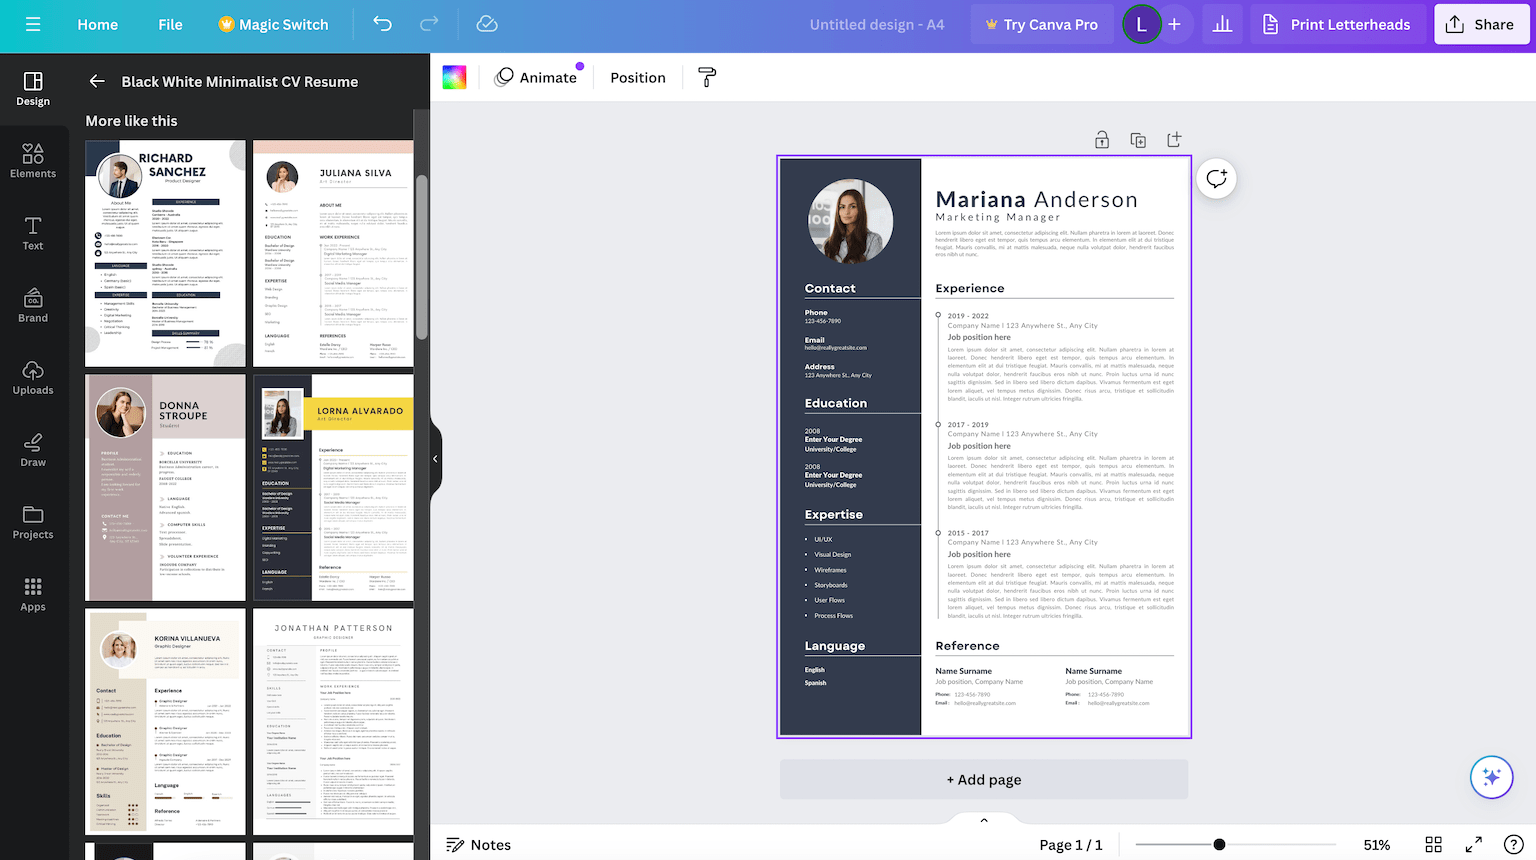 An example of Canva's resume builder